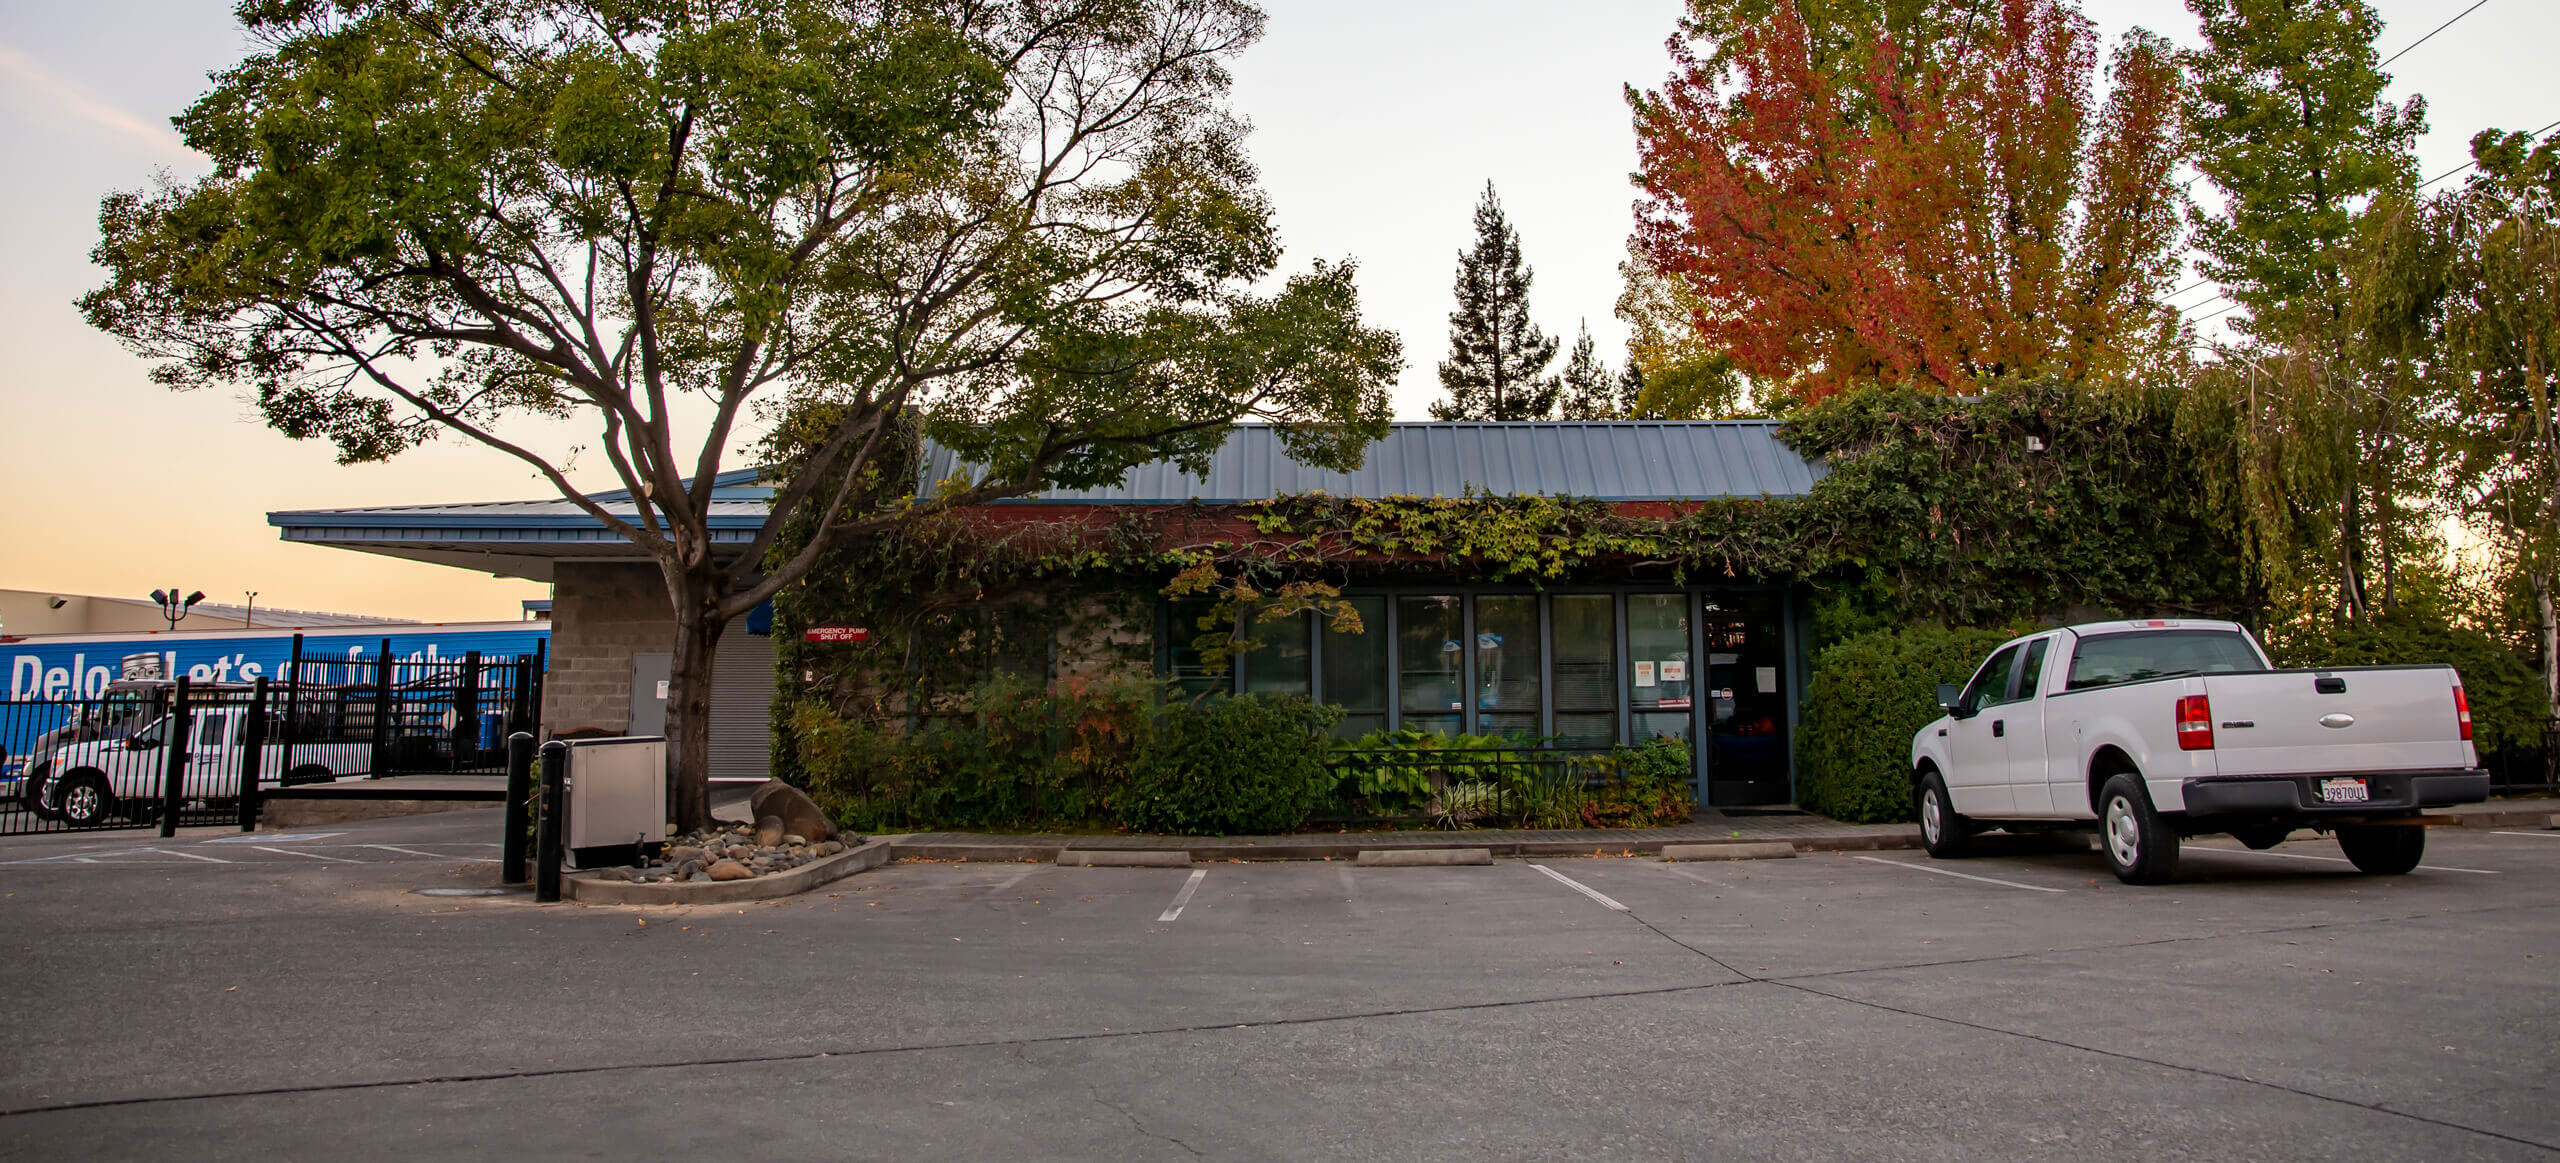 Our main business office is at 4325 Pacific Street, Rocklin, California. Oil is only sold by the case at this location. We offer a variety of fuel types.